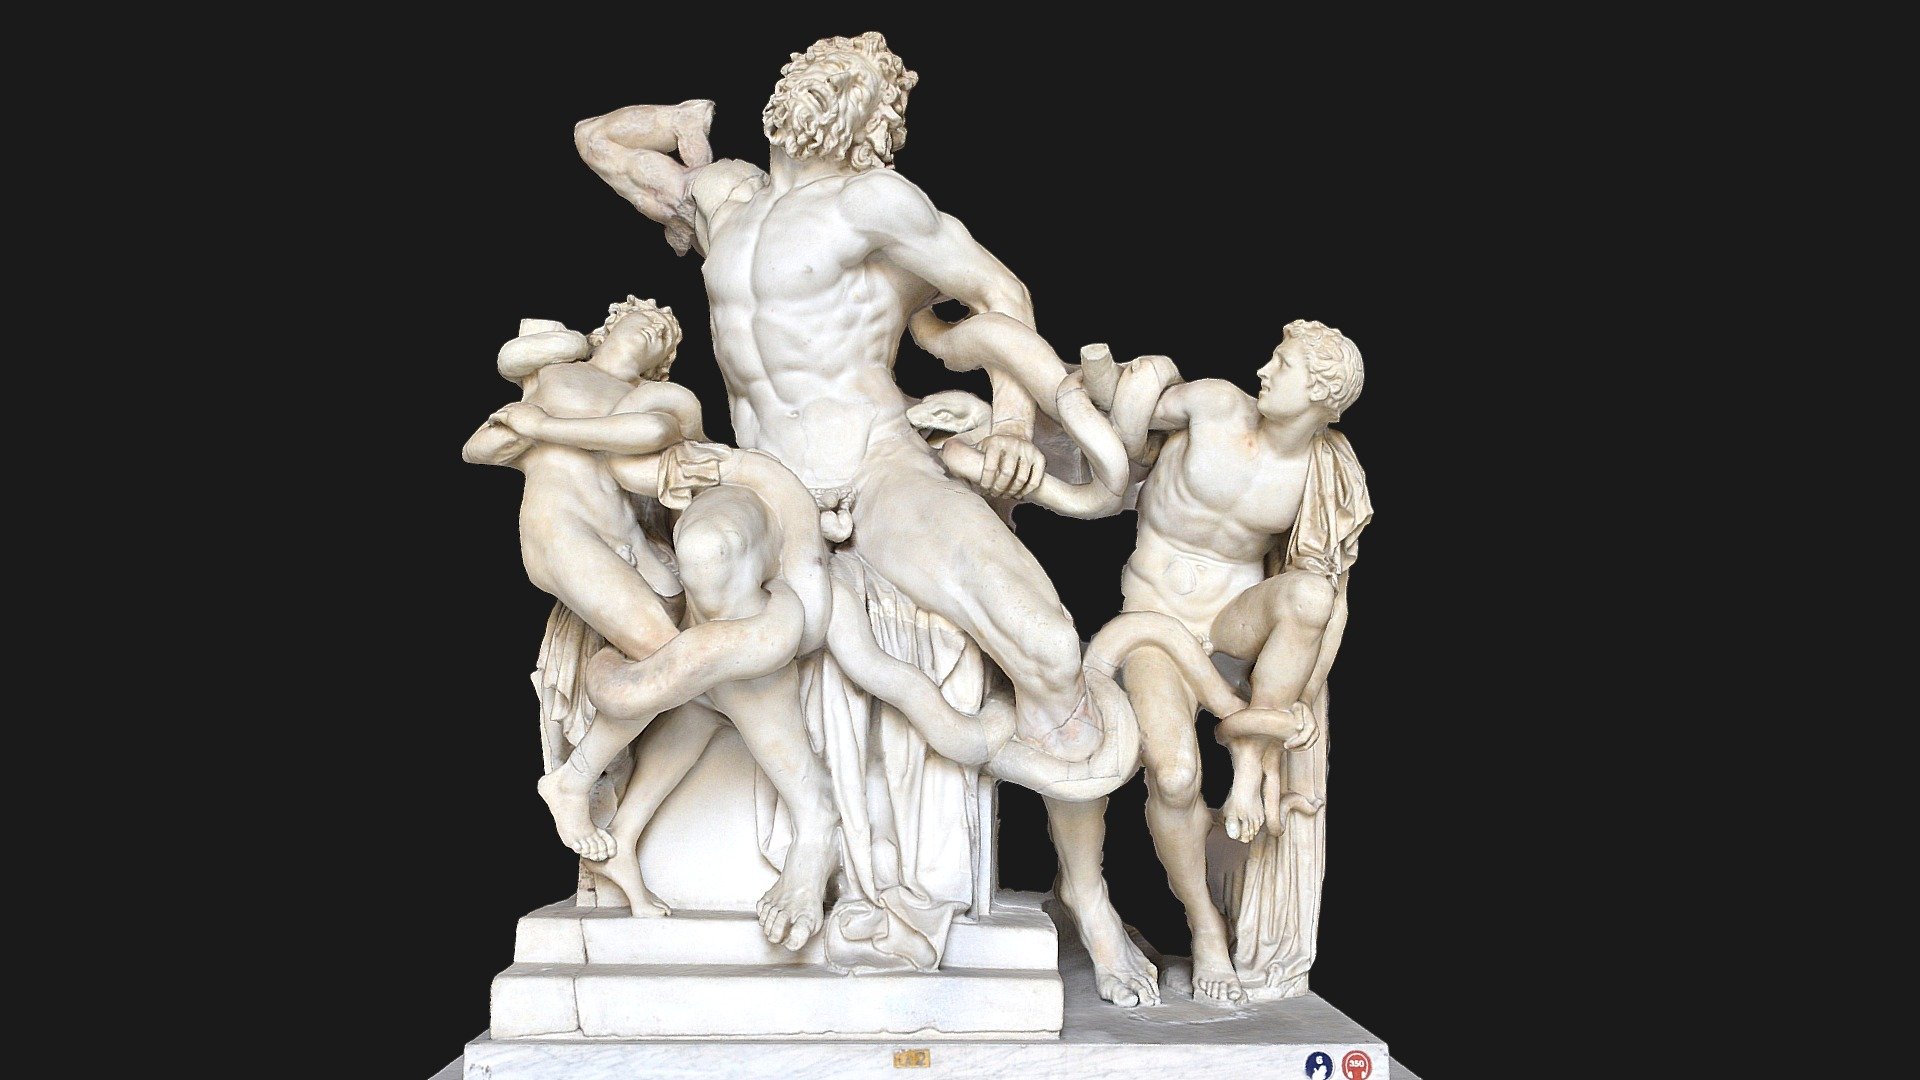 Laocoön and His Sons

Vatican Museums, Vatican City, Rome

This statue group was found in 1506 on the Esquiline Hill in Rome and immediately identified as the Laocoön described by Pliny the Elder as a masterpiece of the sculptors of Rhodes. Such an important sculpture could not escape the notice of Pope Julius II (1503-1513) who bought it immediately and had it displayed in the Statues Courtyard (Cortile delle Statue), making it the centrepiece of the collection. There has been much debate over the date of the statue, which would seem to have been made around 40-30 B.C 3d model